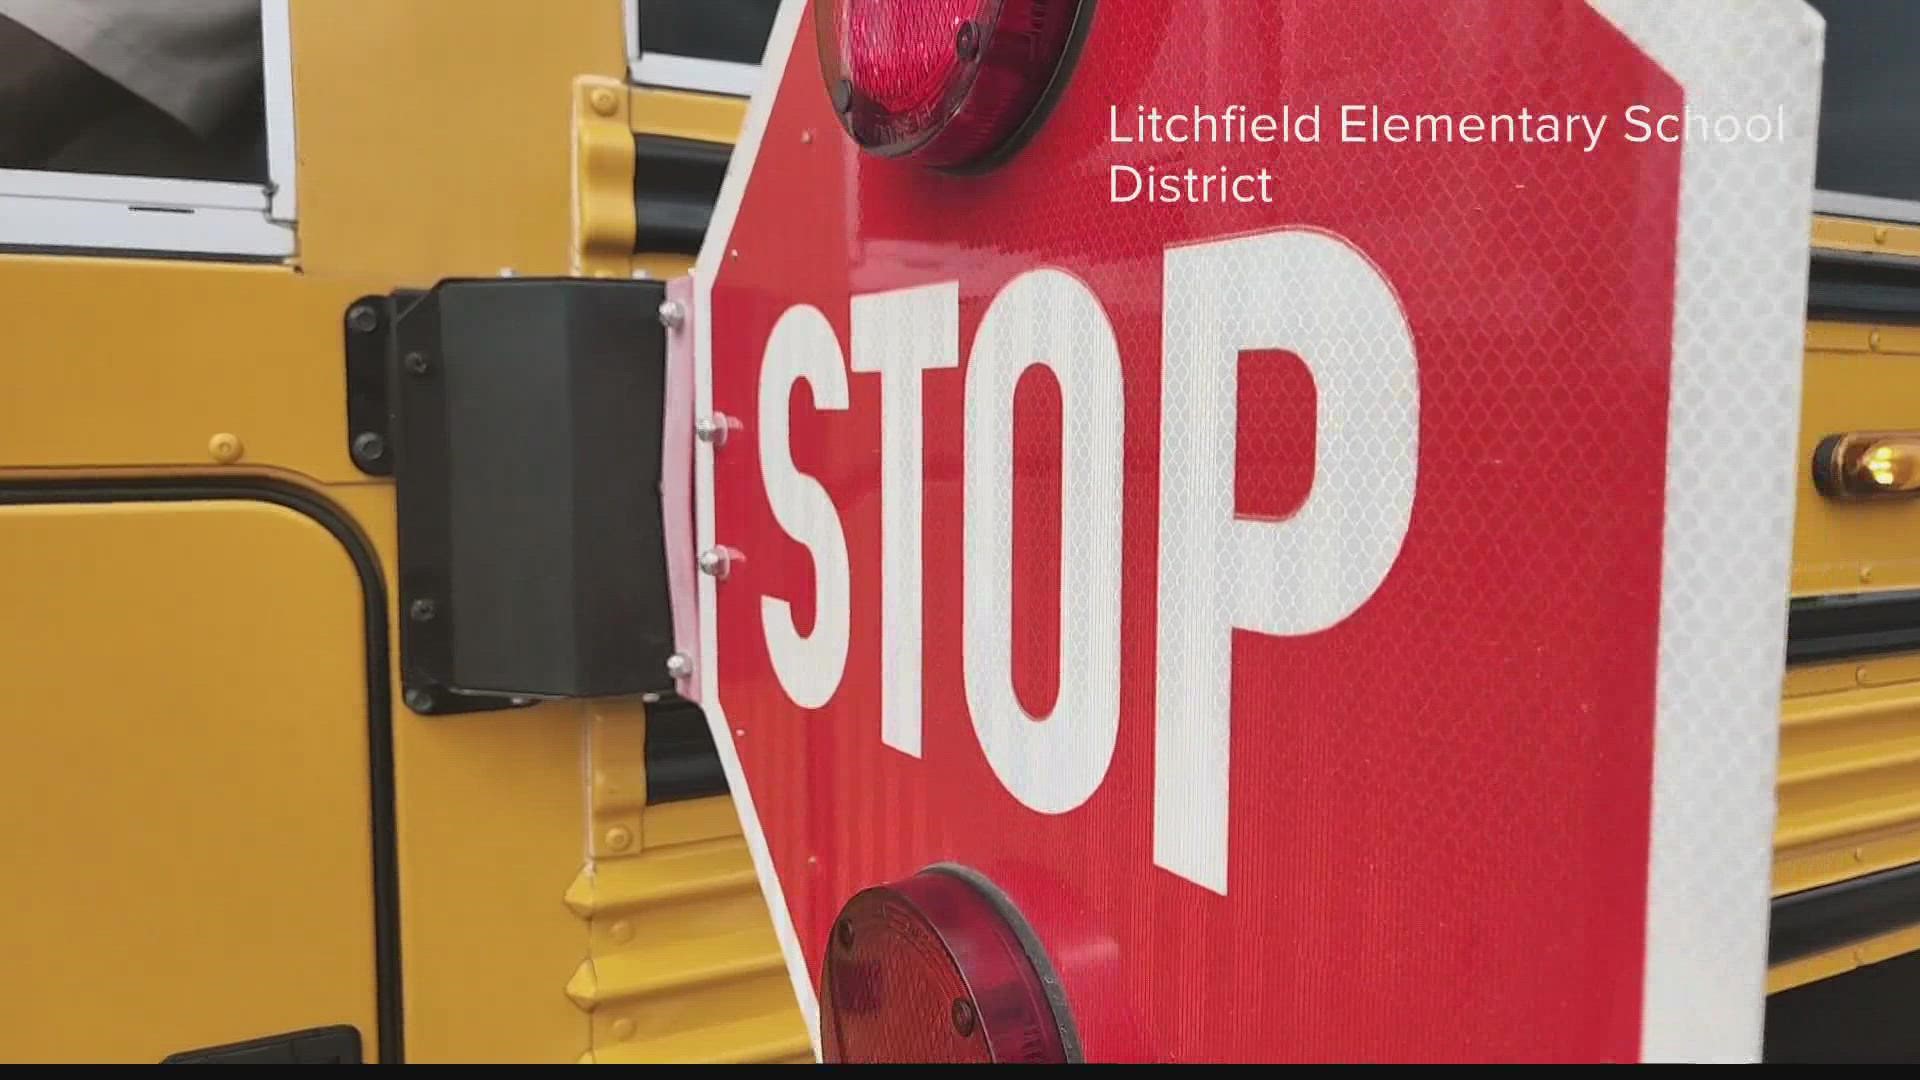 School districts statewide are facing a shortage of school bus drivers. Many bus routes in some cases could be affected as they work to hire more drivers.